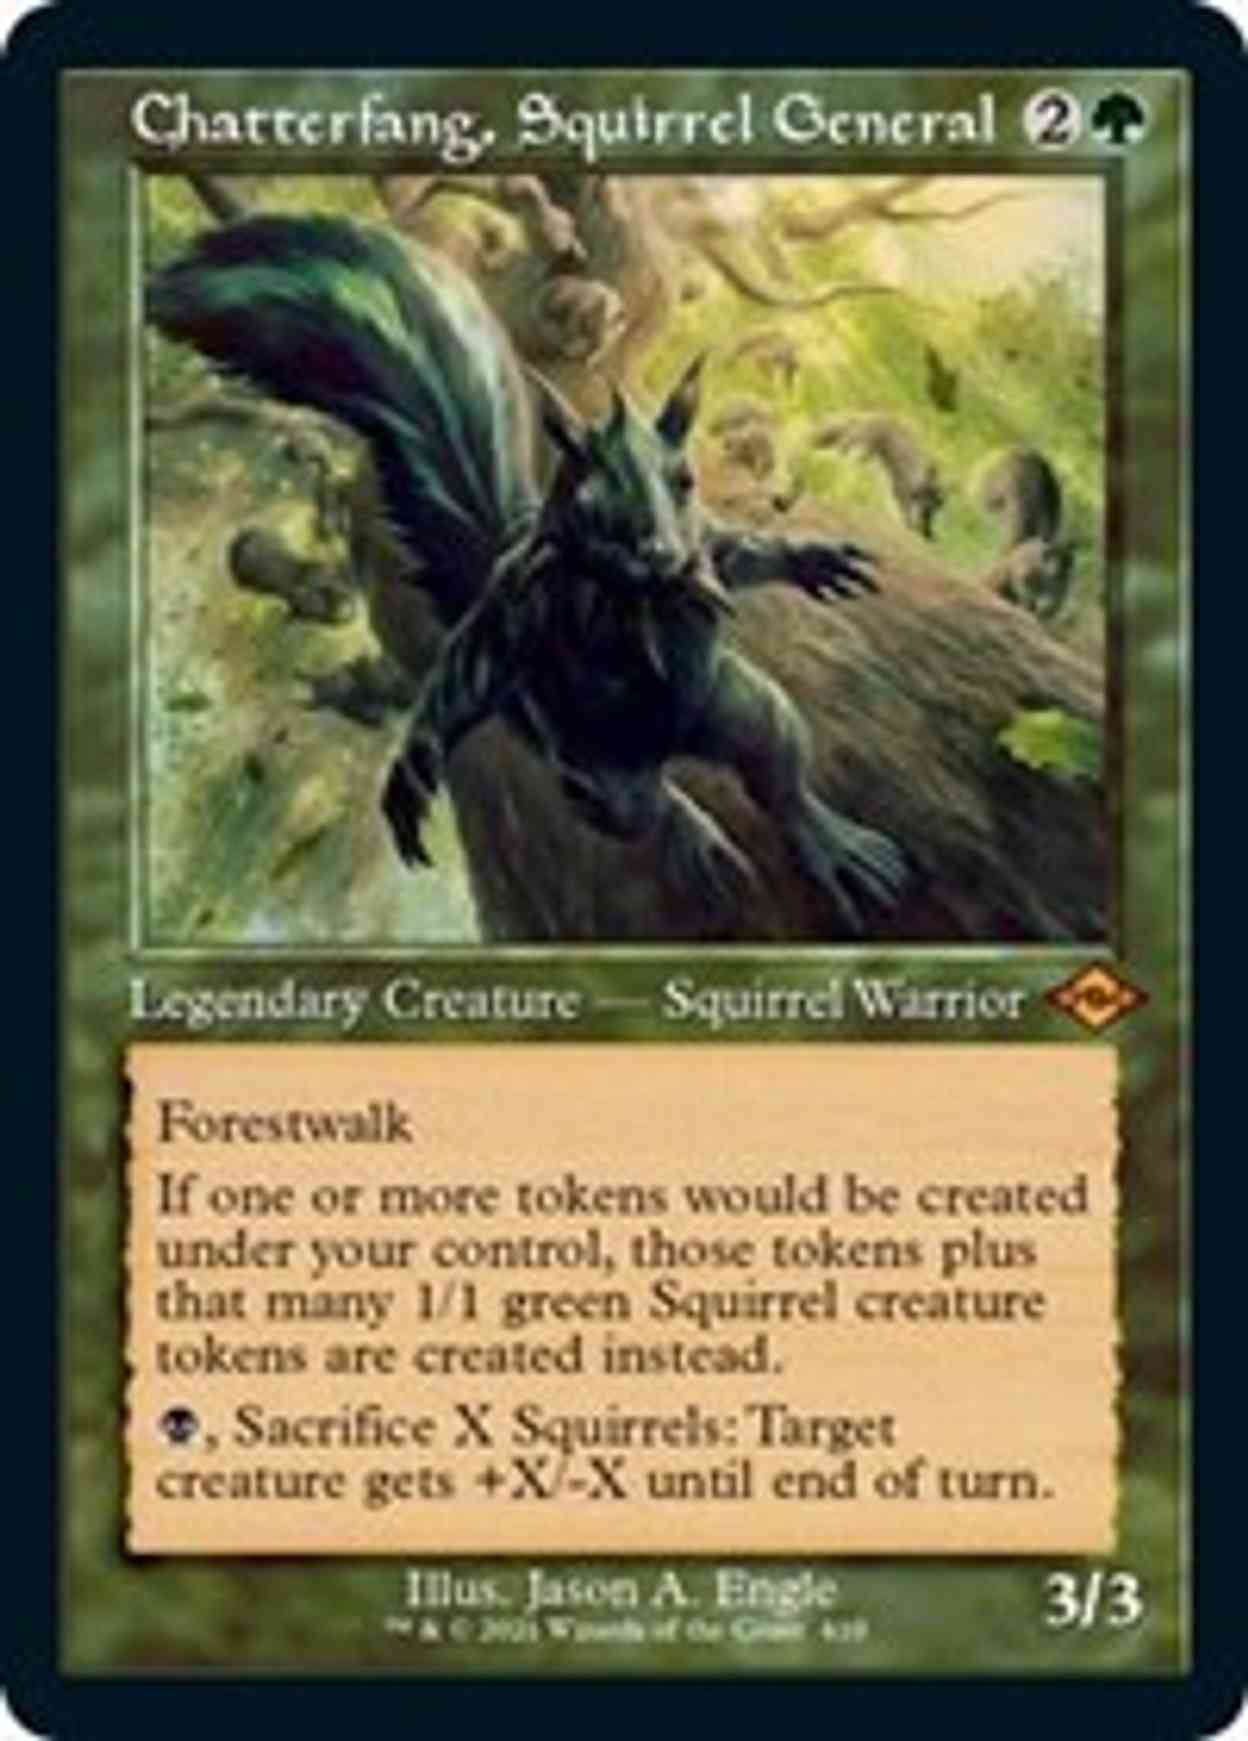 Chatterfang, Squirrel General (Retro Frame) magic card front